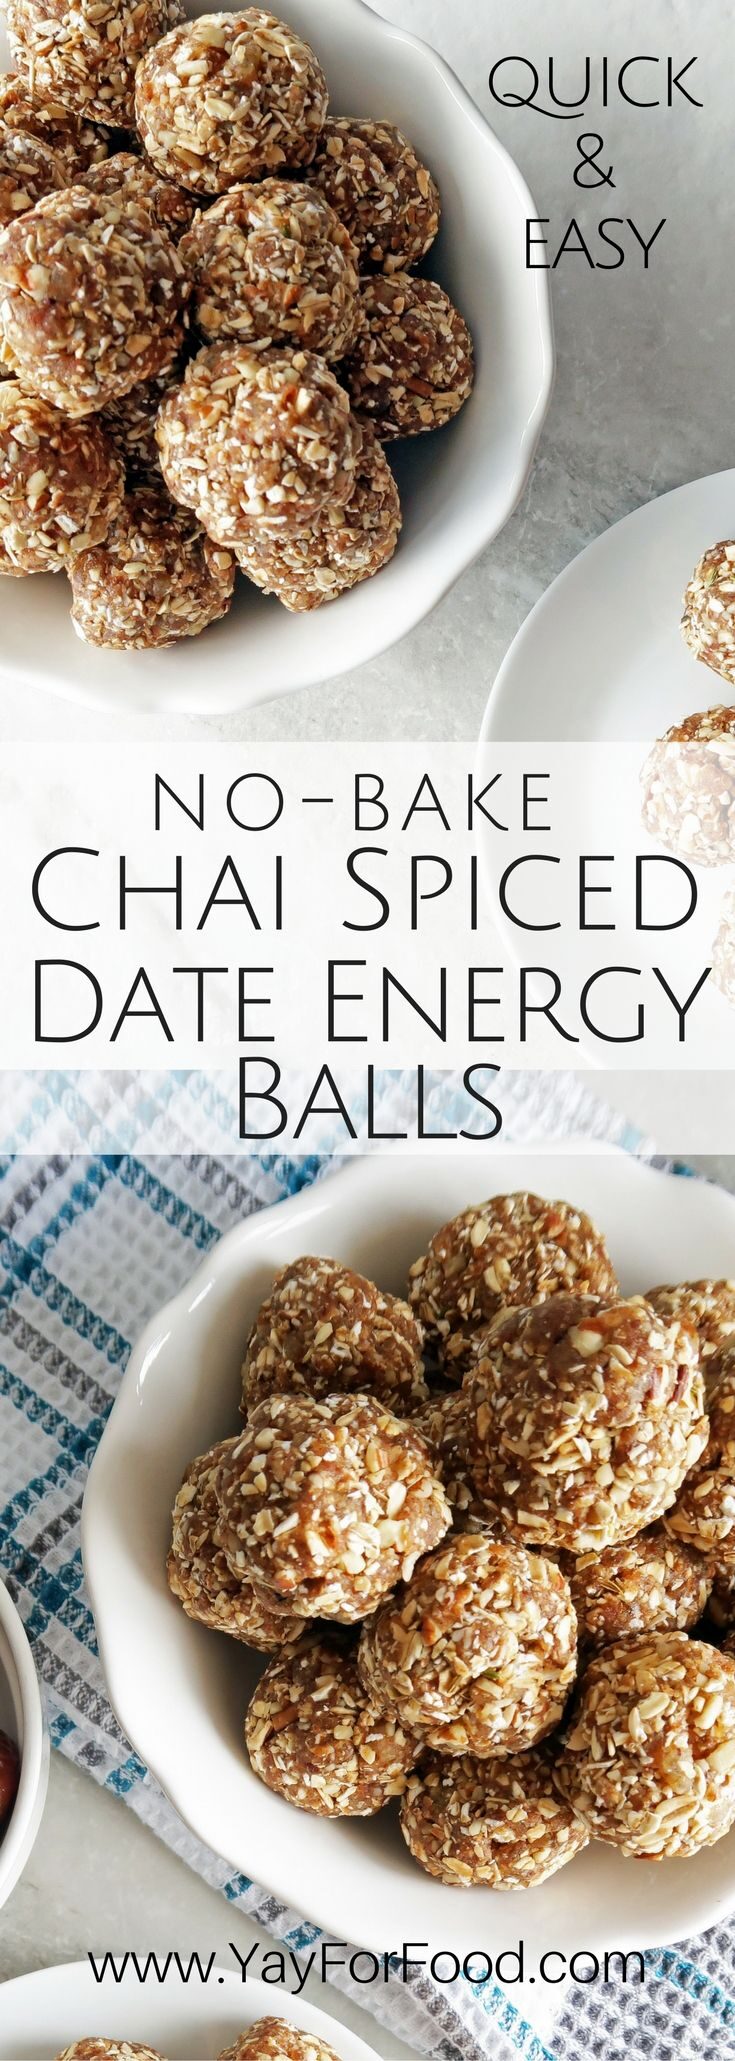 No-Bake Chai Spiced Date Energy Balls - Yay! For Food